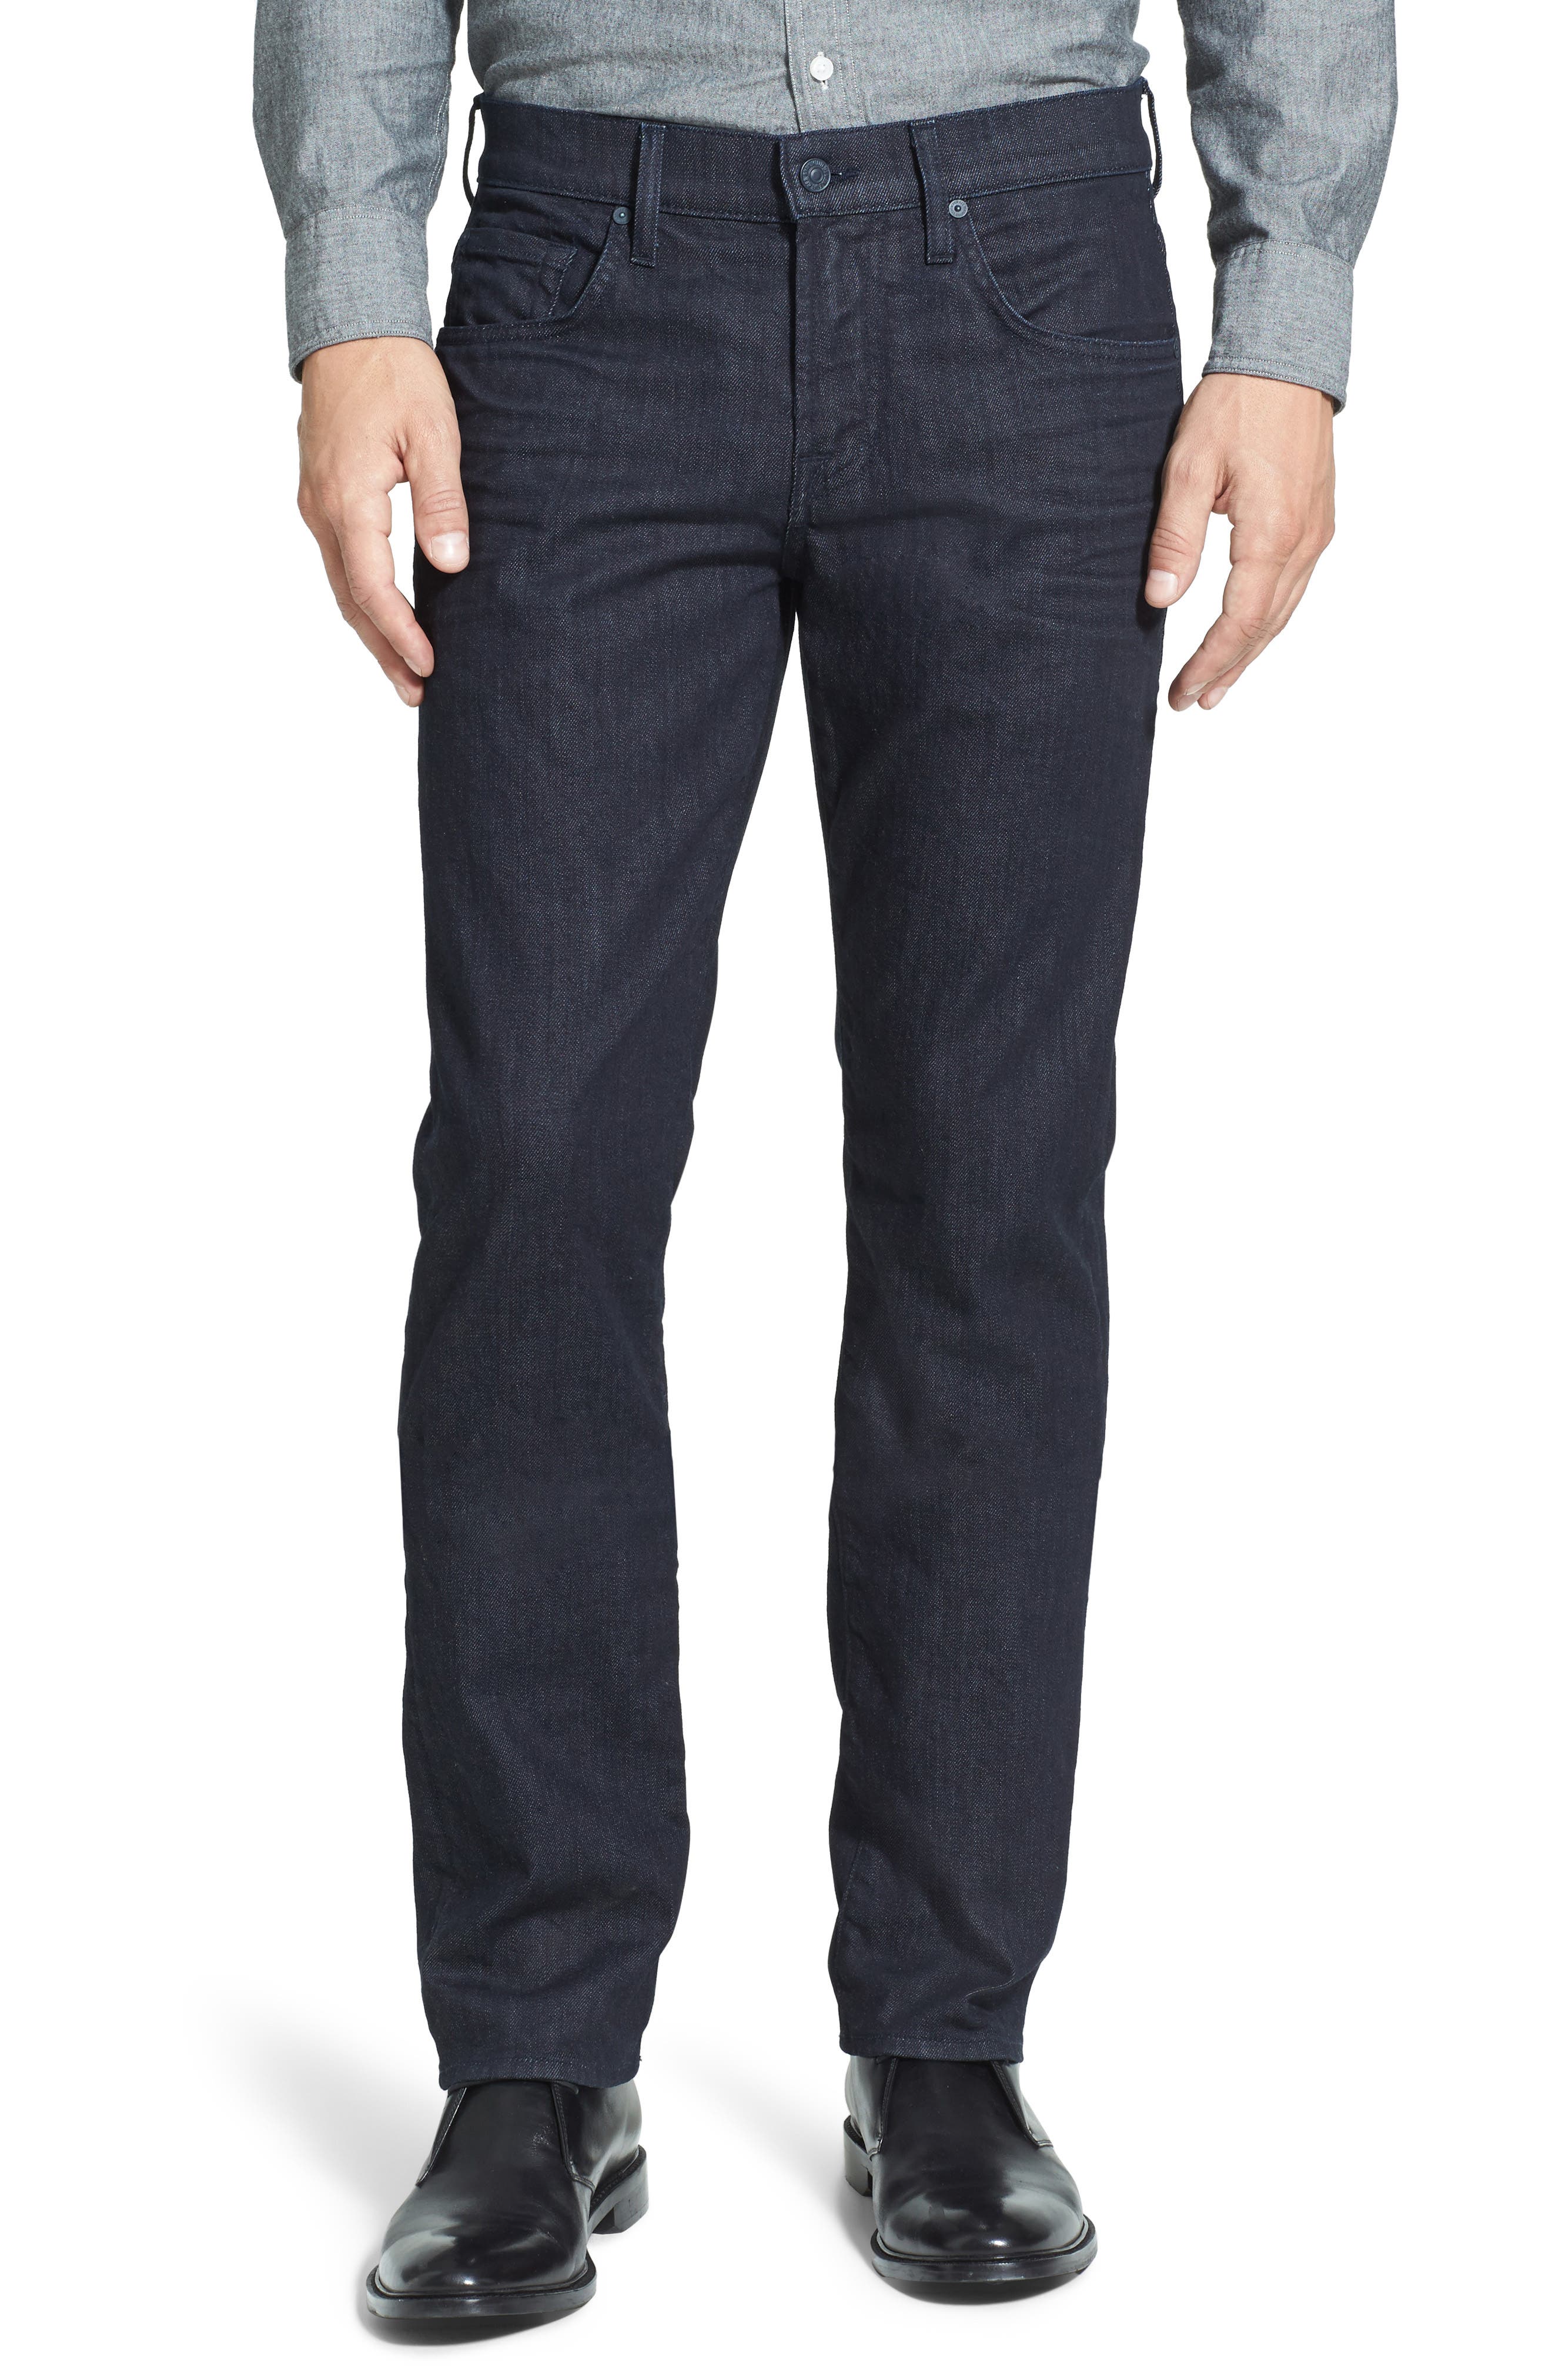 NWT Men's 7 For All ManKind Slimmy Slim Straight Leg Jeans Retail $198